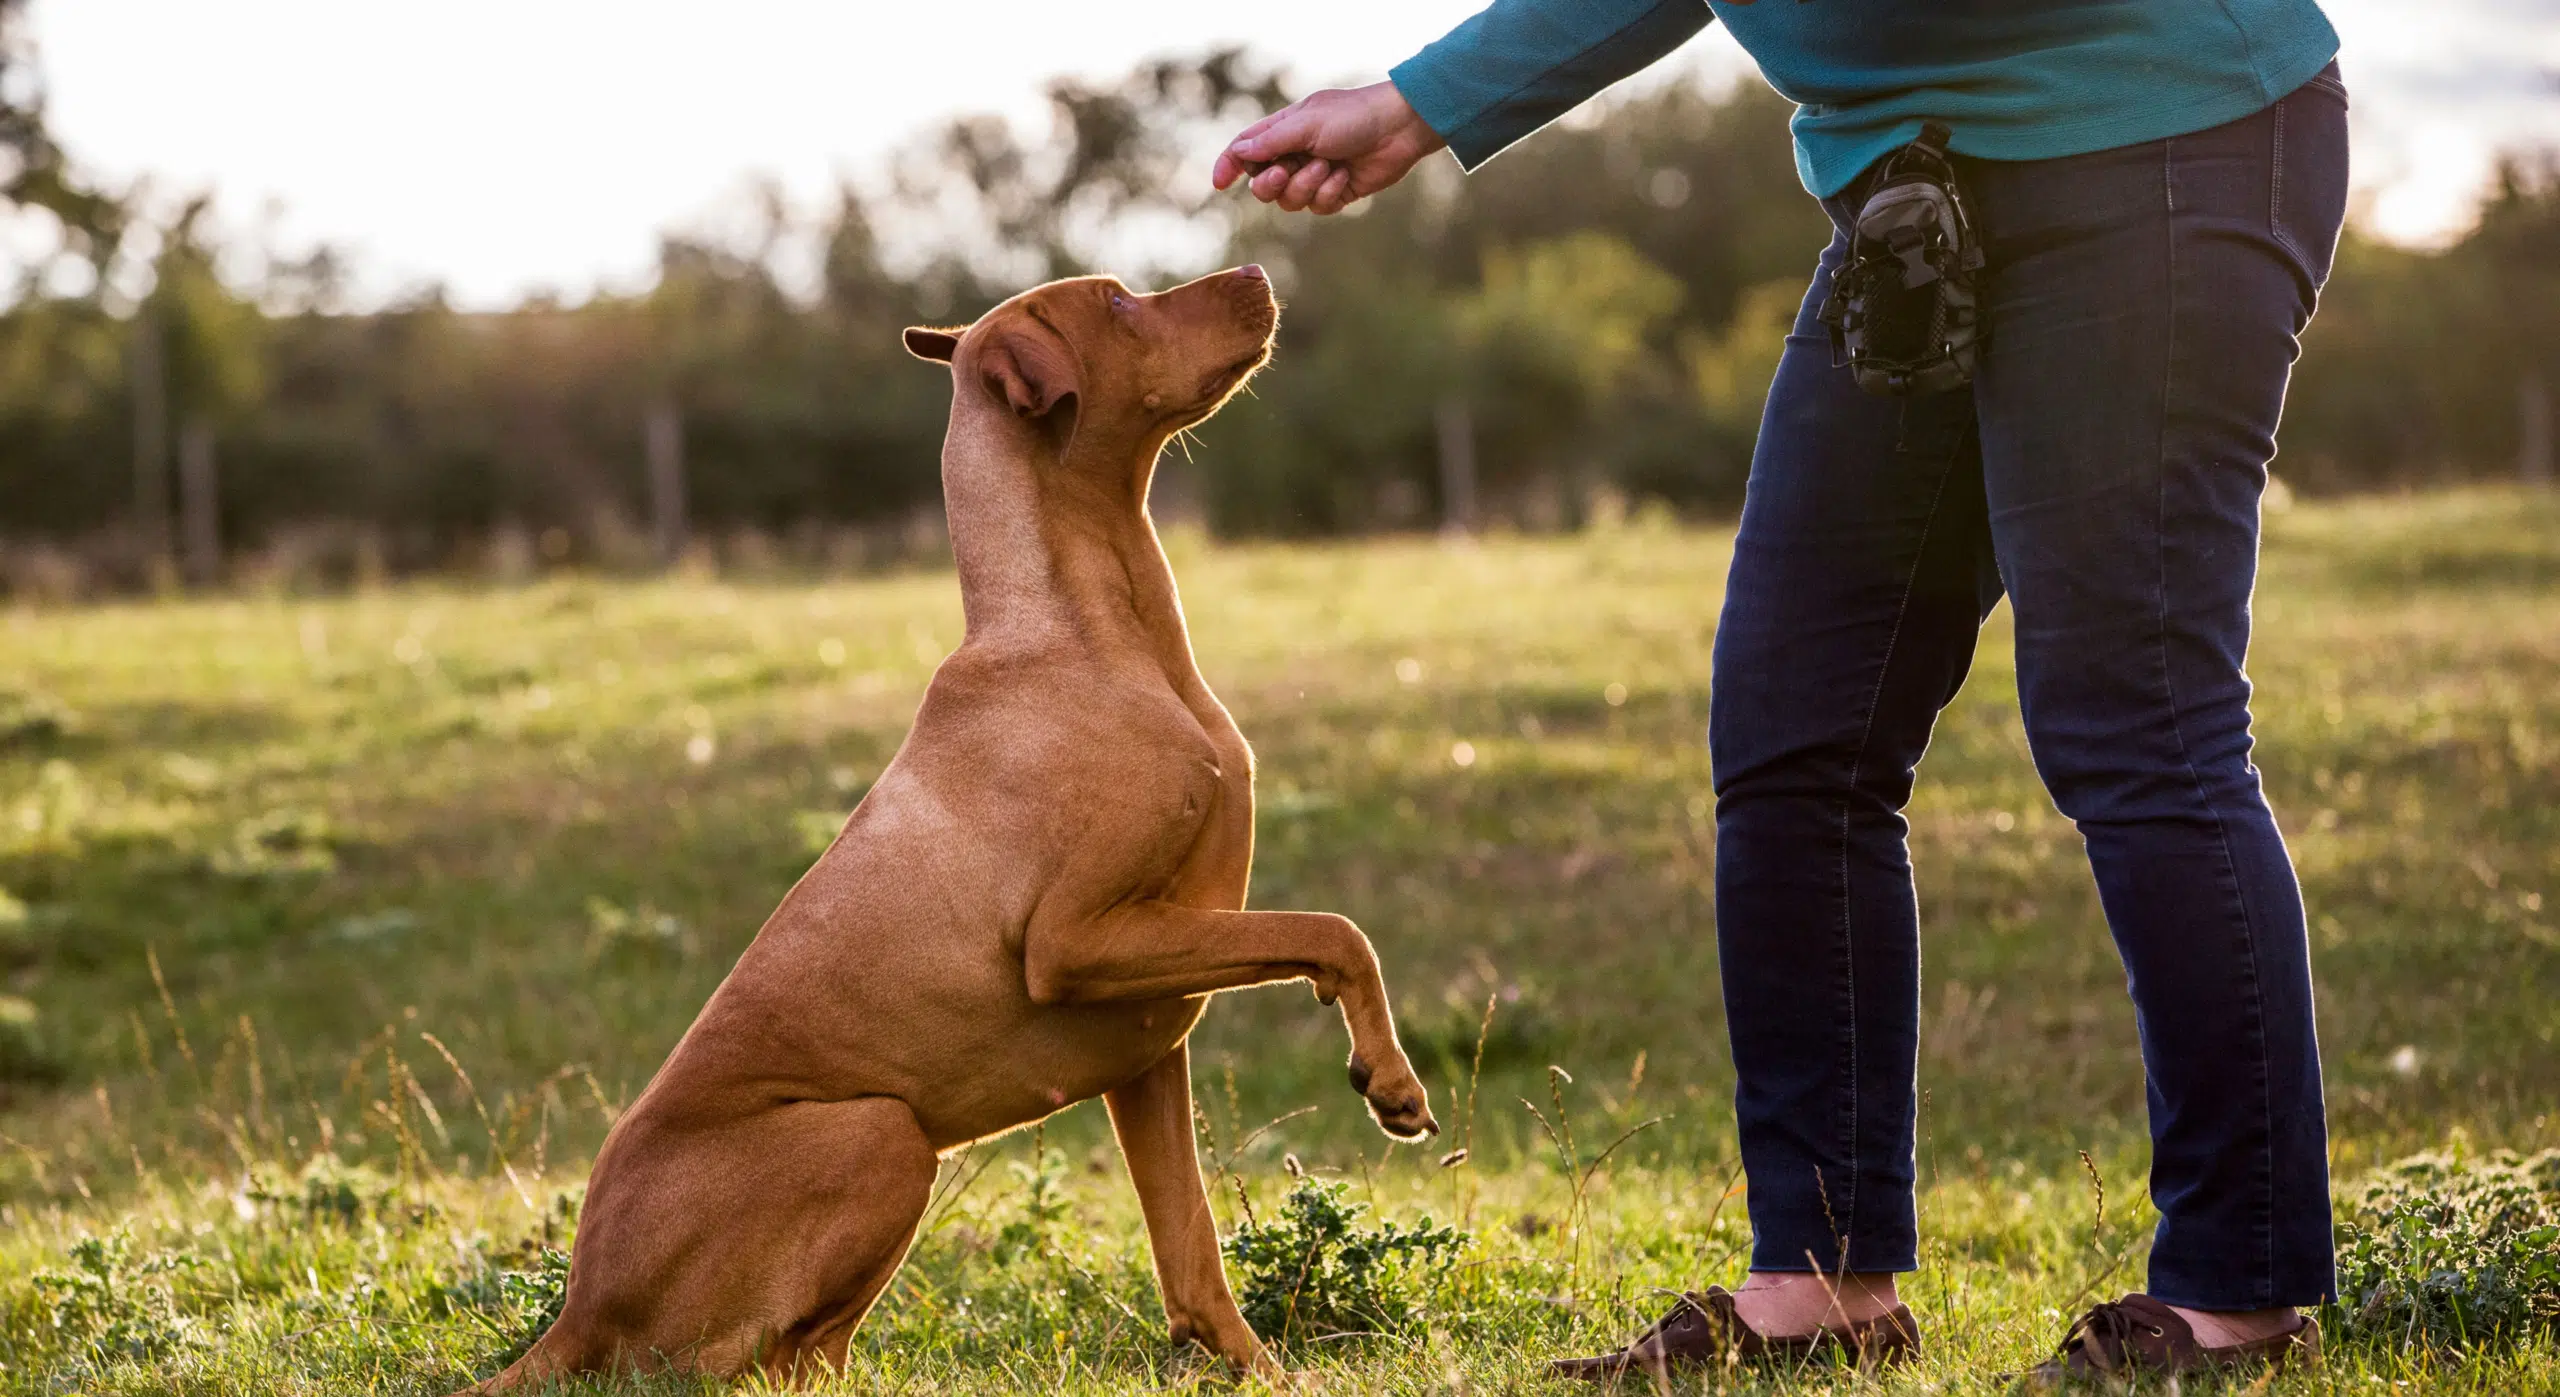 A dog owner conducting training techniques with a Vizsla dog